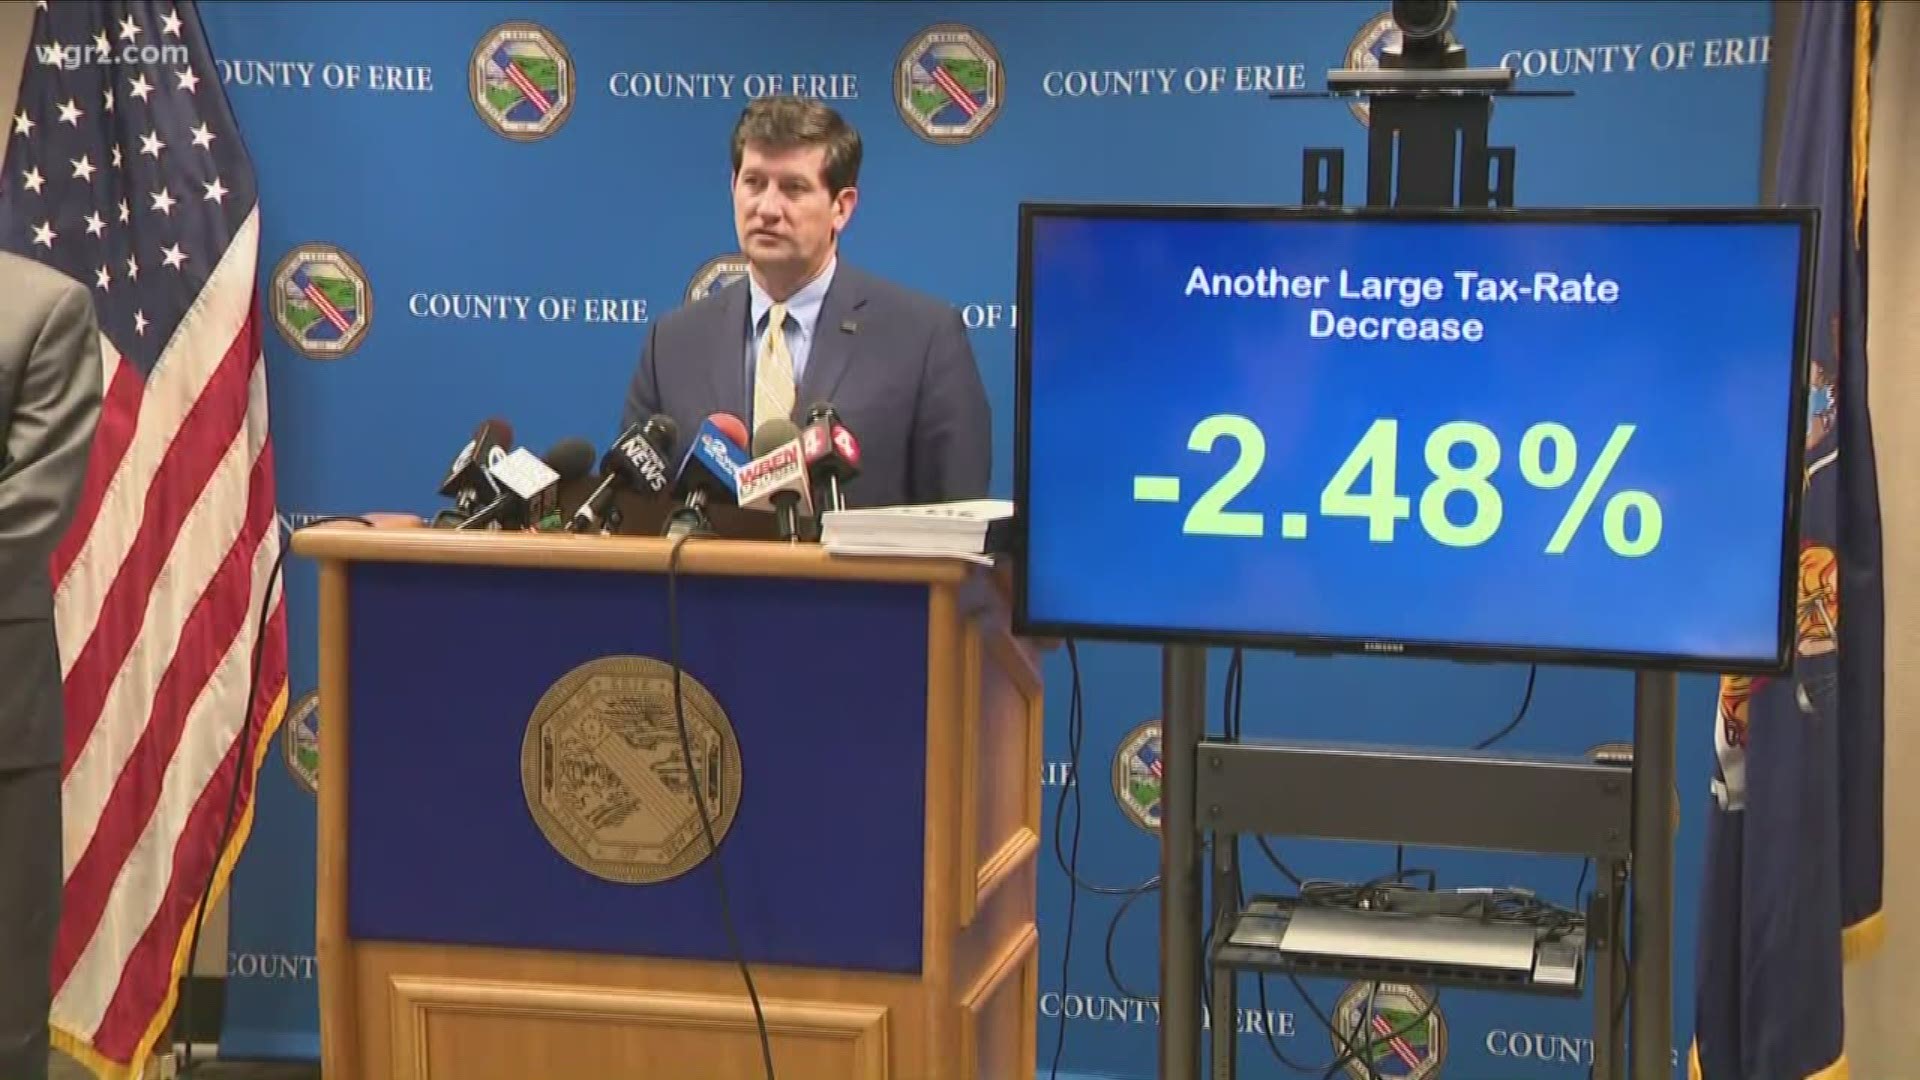 the county anticipates a good amount of additional revenue next year... from strong economic growth.